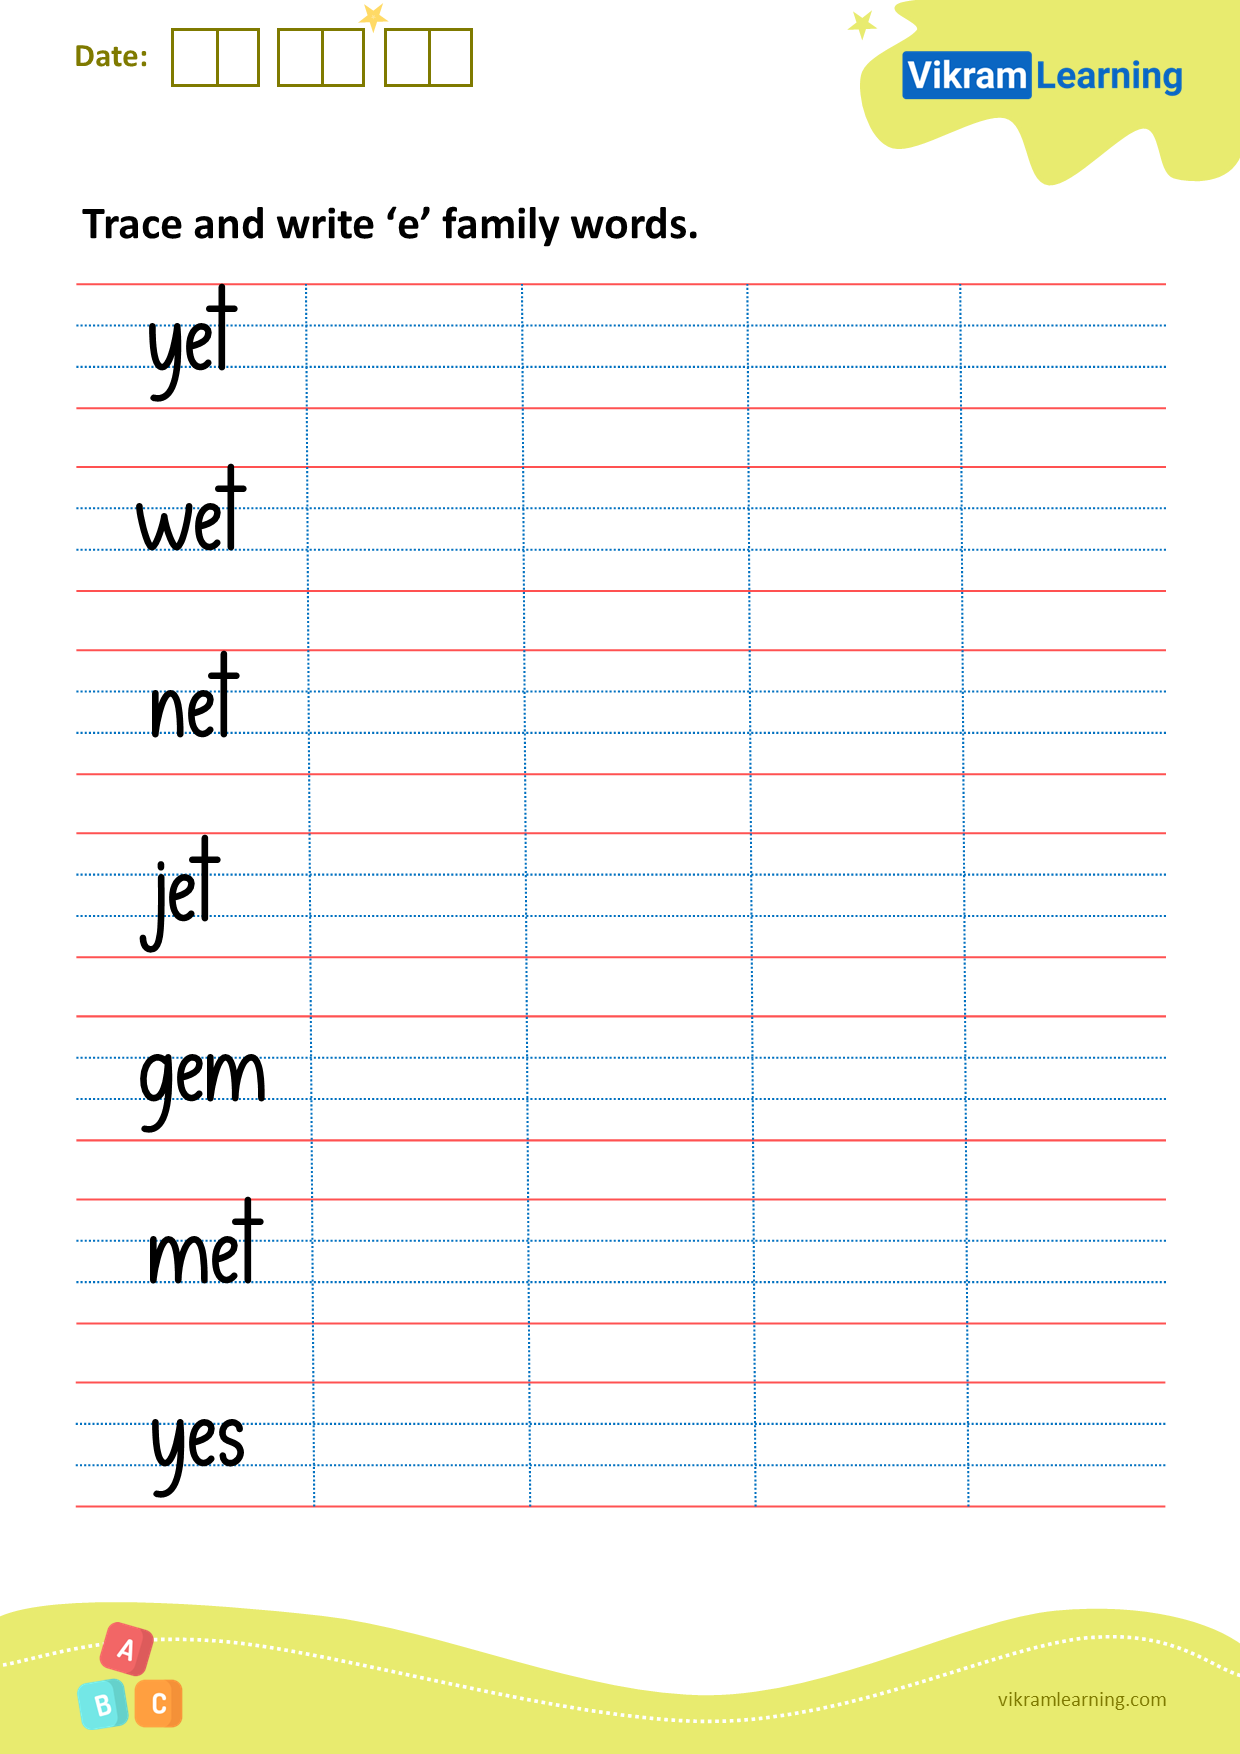 Download trace and write ‘e’ family words worksheets